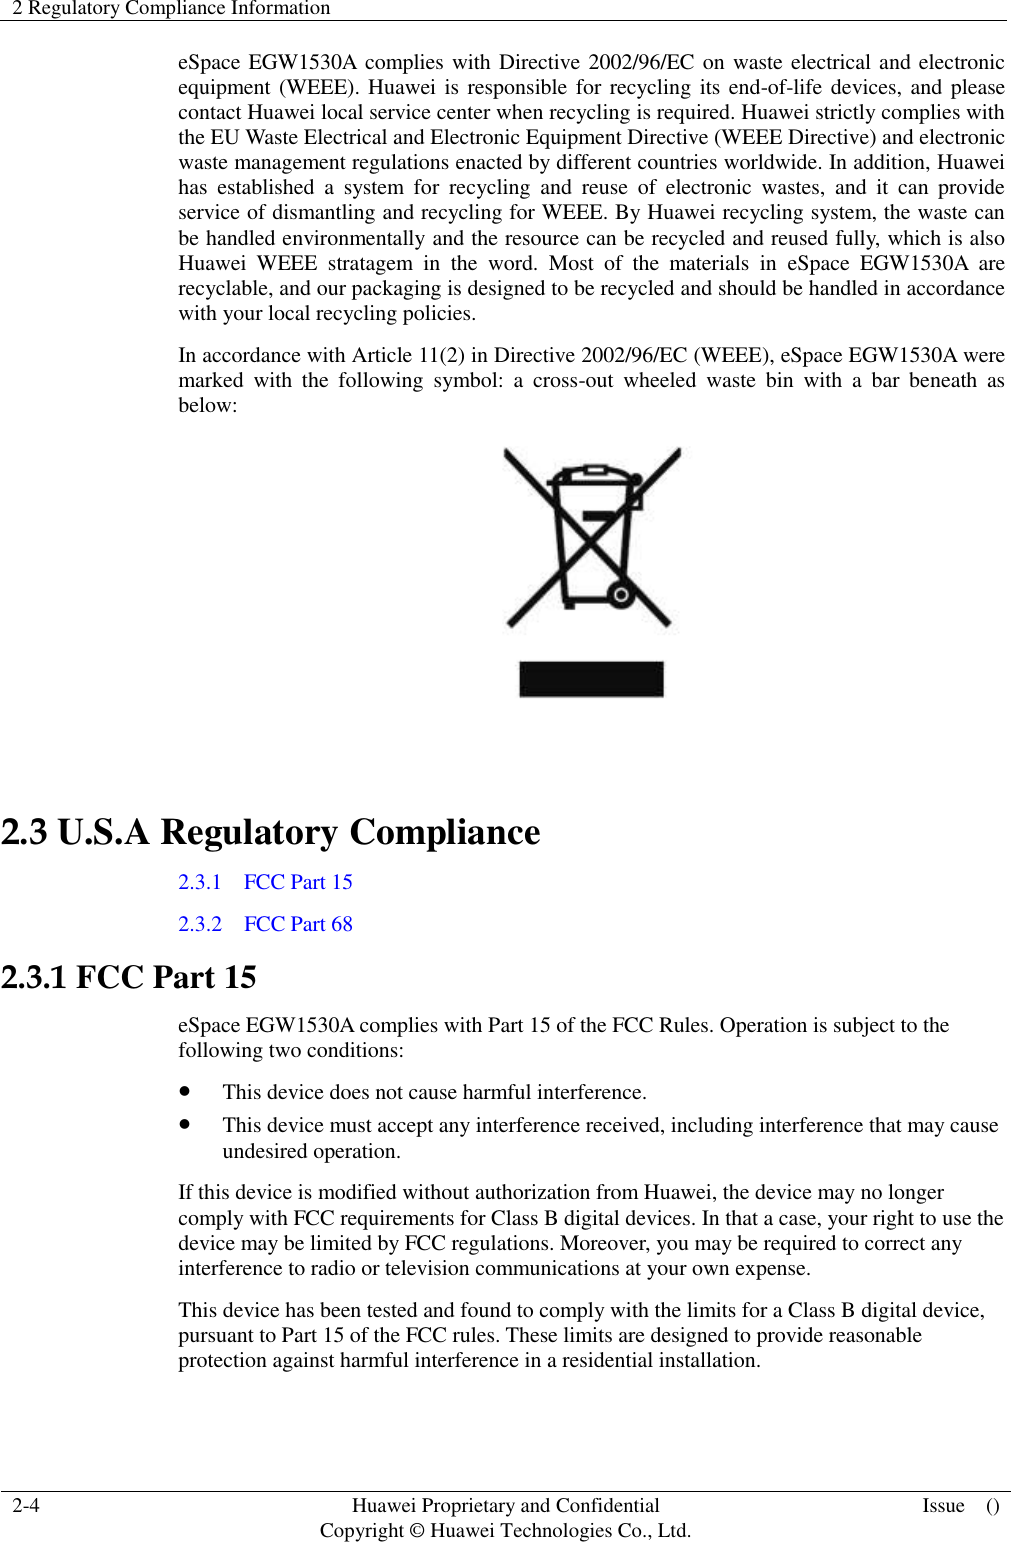 2 Regulatory Compliance Information    2-4 Huawei Proprietary and Confidential                                     Copyright © Huawei Technologies Co., Ltd. Issue    ()  eSpace EGW1530A complies with Directive 2002/96/EC on waste electrical and electronic equipment (WEEE). Huawei is responsible for recycling its end-of-life devices, and please contact Huawei local service center when recycling is required. Huawei strictly complies with the EU Waste Electrical and Electronic Equipment Directive (WEEE Directive) and electronic waste management regulations enacted by different countries worldwide. In addition, Huawei has  established  a  system  for  recycling  and  reuse  of  electronic  wastes,  and  it  can  provide service of dismantling and recycling for WEEE. By Huawei recycling system, the waste can be handled environmentally and the resource can be recycled and reused fully, which is also Huawei  WEEE  stratagem  in  the  word.  Most  of  the  materials  in  eSpace  EGW1530A  are recyclable, and our packaging is designed to be recycled and should be handled in accordance with your local recycling policies.   In accordance with Article 11(2) in Directive 2002/96/EC (WEEE), eSpace EGW1530A were marked  with  the  following  symbol:  a  cross-out  wheeled  waste  bin  with  a  bar  beneath  as below:   2.3 U.S.A Regulatory Compliance 2.3.1    FCC Part 15 2.3.2    FCC Part 68 2.3.1 FCC Part 15 eSpace EGW1530A complies with Part 15 of the FCC Rules. Operation is subject to the following two conditions:  This device does not cause harmful interference.  This device must accept any interference received, including interference that may cause undesired operation. If this device is modified without authorization from Huawei, the device may no longer comply with FCC requirements for Class B digital devices. In that a case, your right to use the device may be limited by FCC regulations. Moreover, you may be required to correct any interference to radio or television communications at your own expense. This device has been tested and found to comply with the limits for a Class B digital device, pursuant to Part 15 of the FCC rules. These limits are designed to provide reasonable protection against harmful interference in a residential installation. 